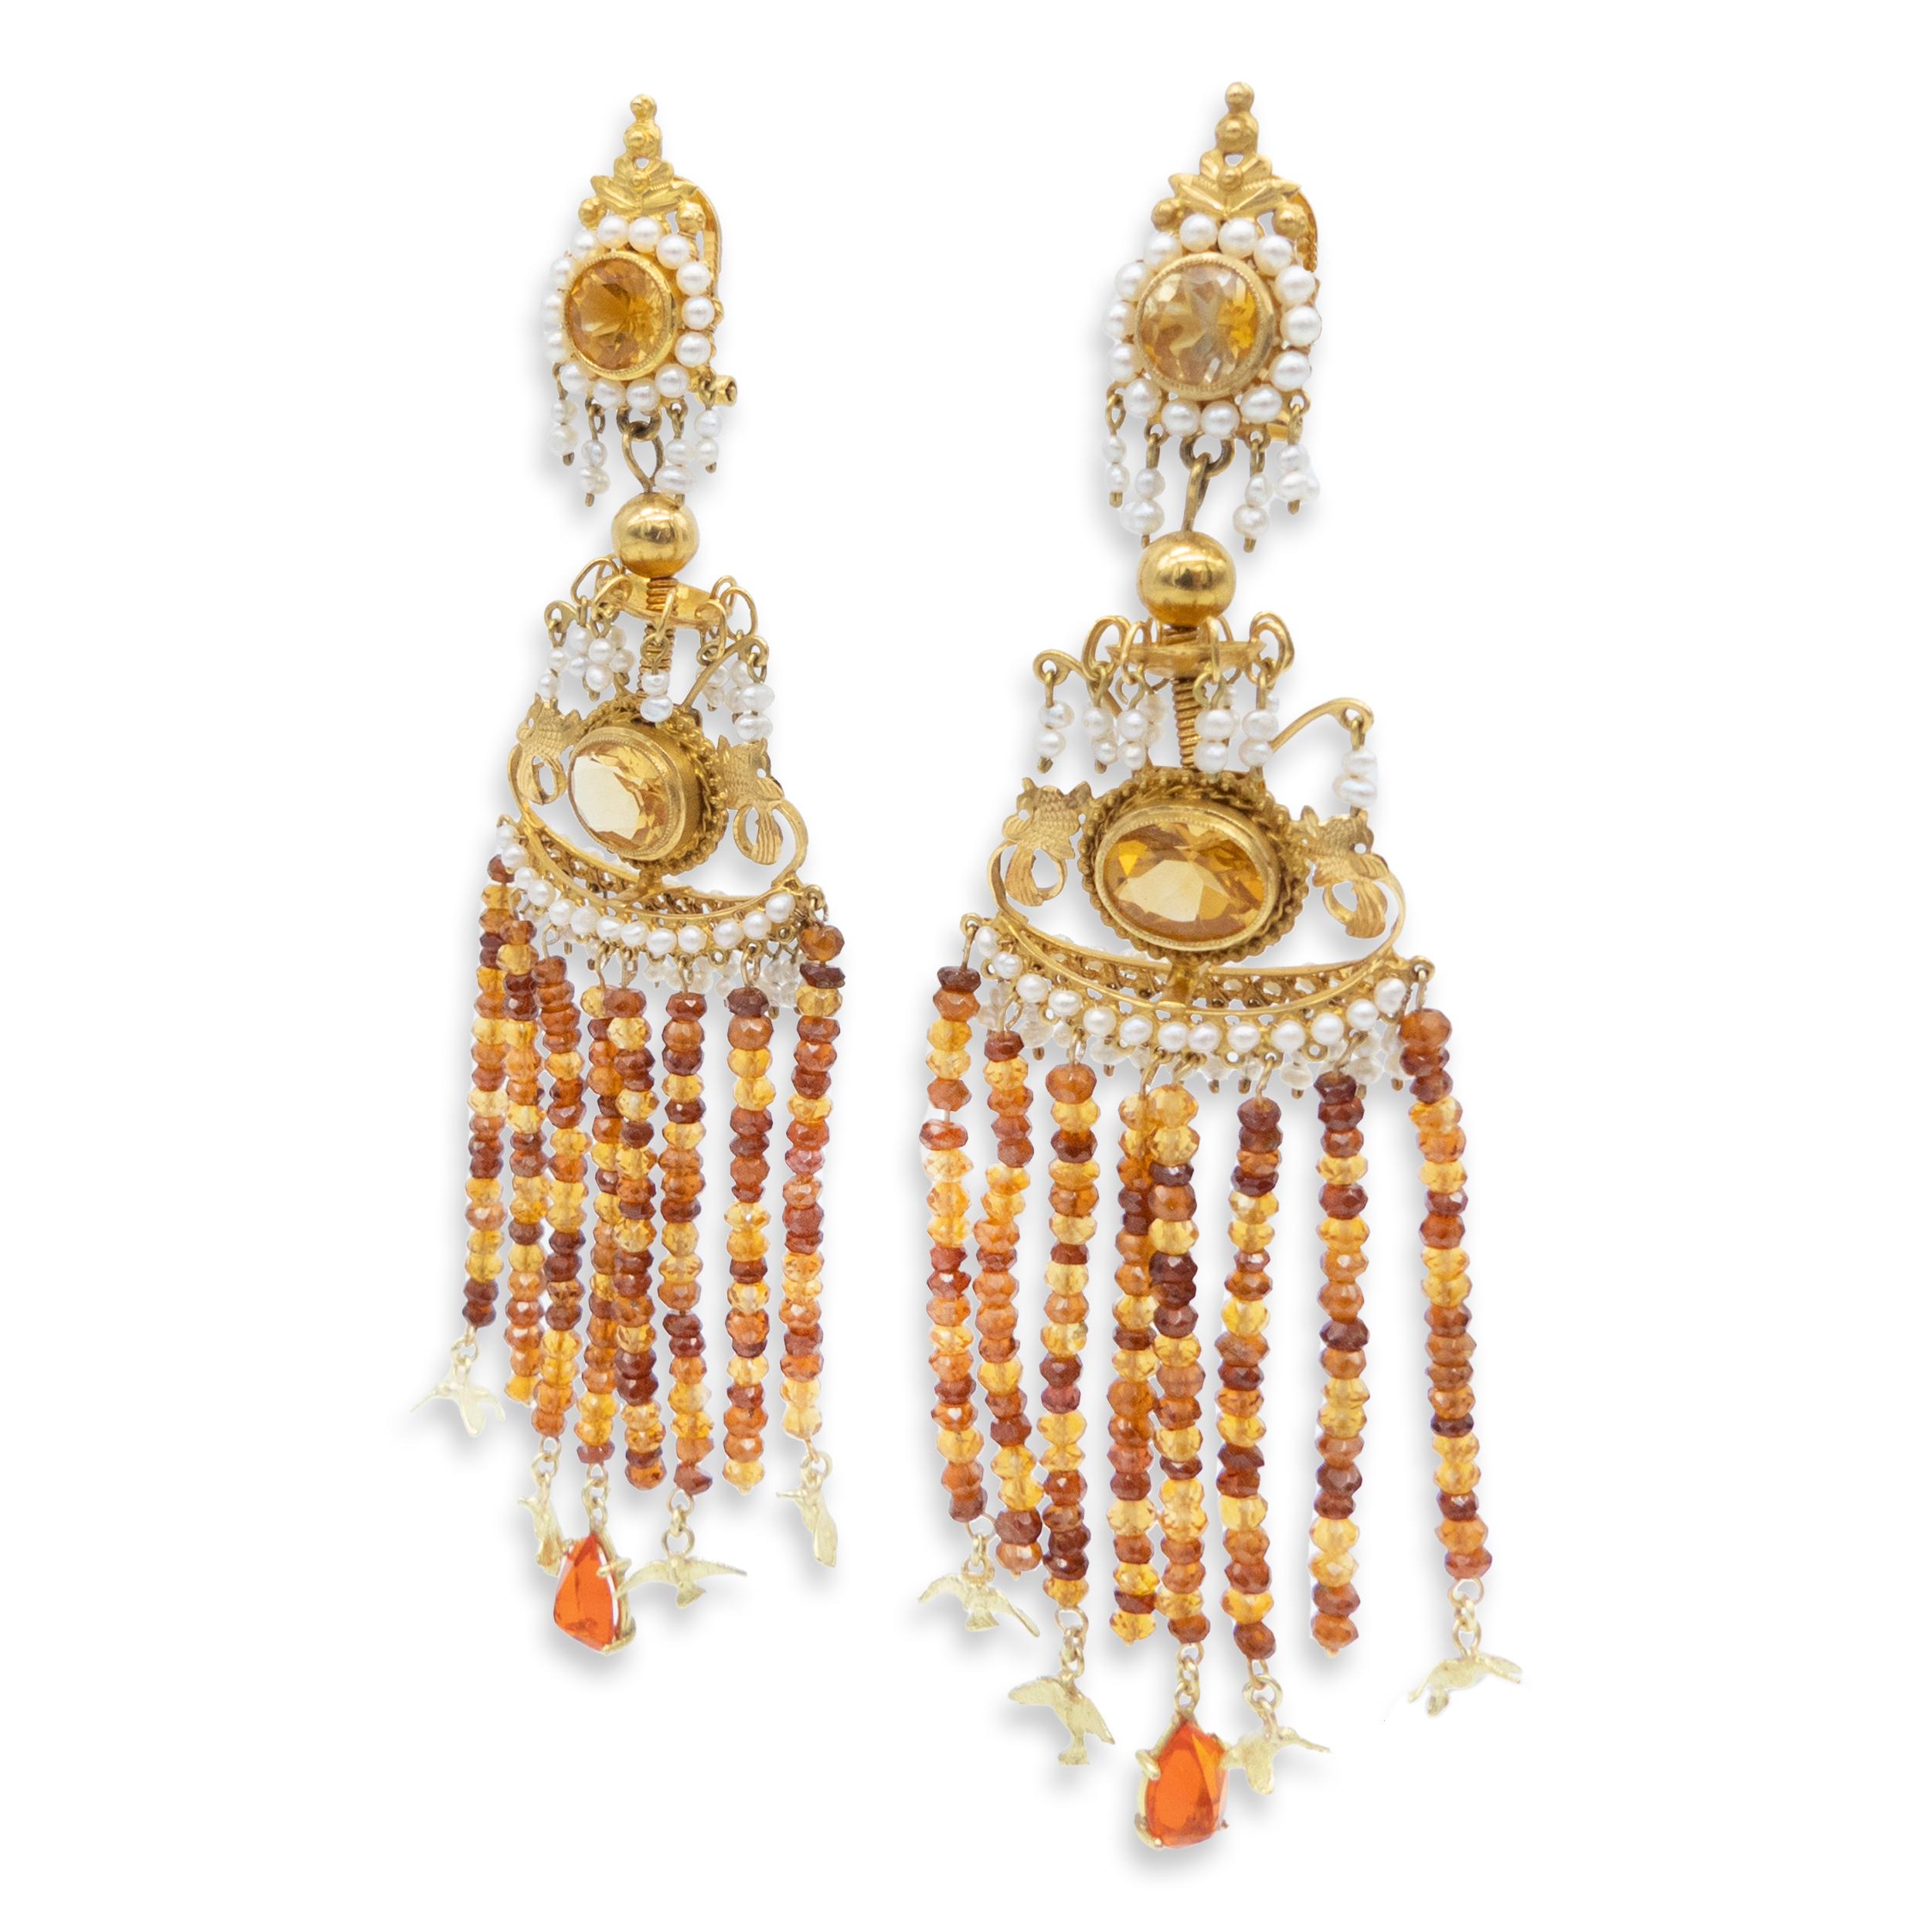 21st Century 18 Karat Gold Fire Opals Pearls Topaz Orange Sapphires Earrings

18 Karat yellow gold earrings, fire opals, pearls, topaz and orange sapphires.

These earrings from the Hanging Gardens collection are a good representation of the essence